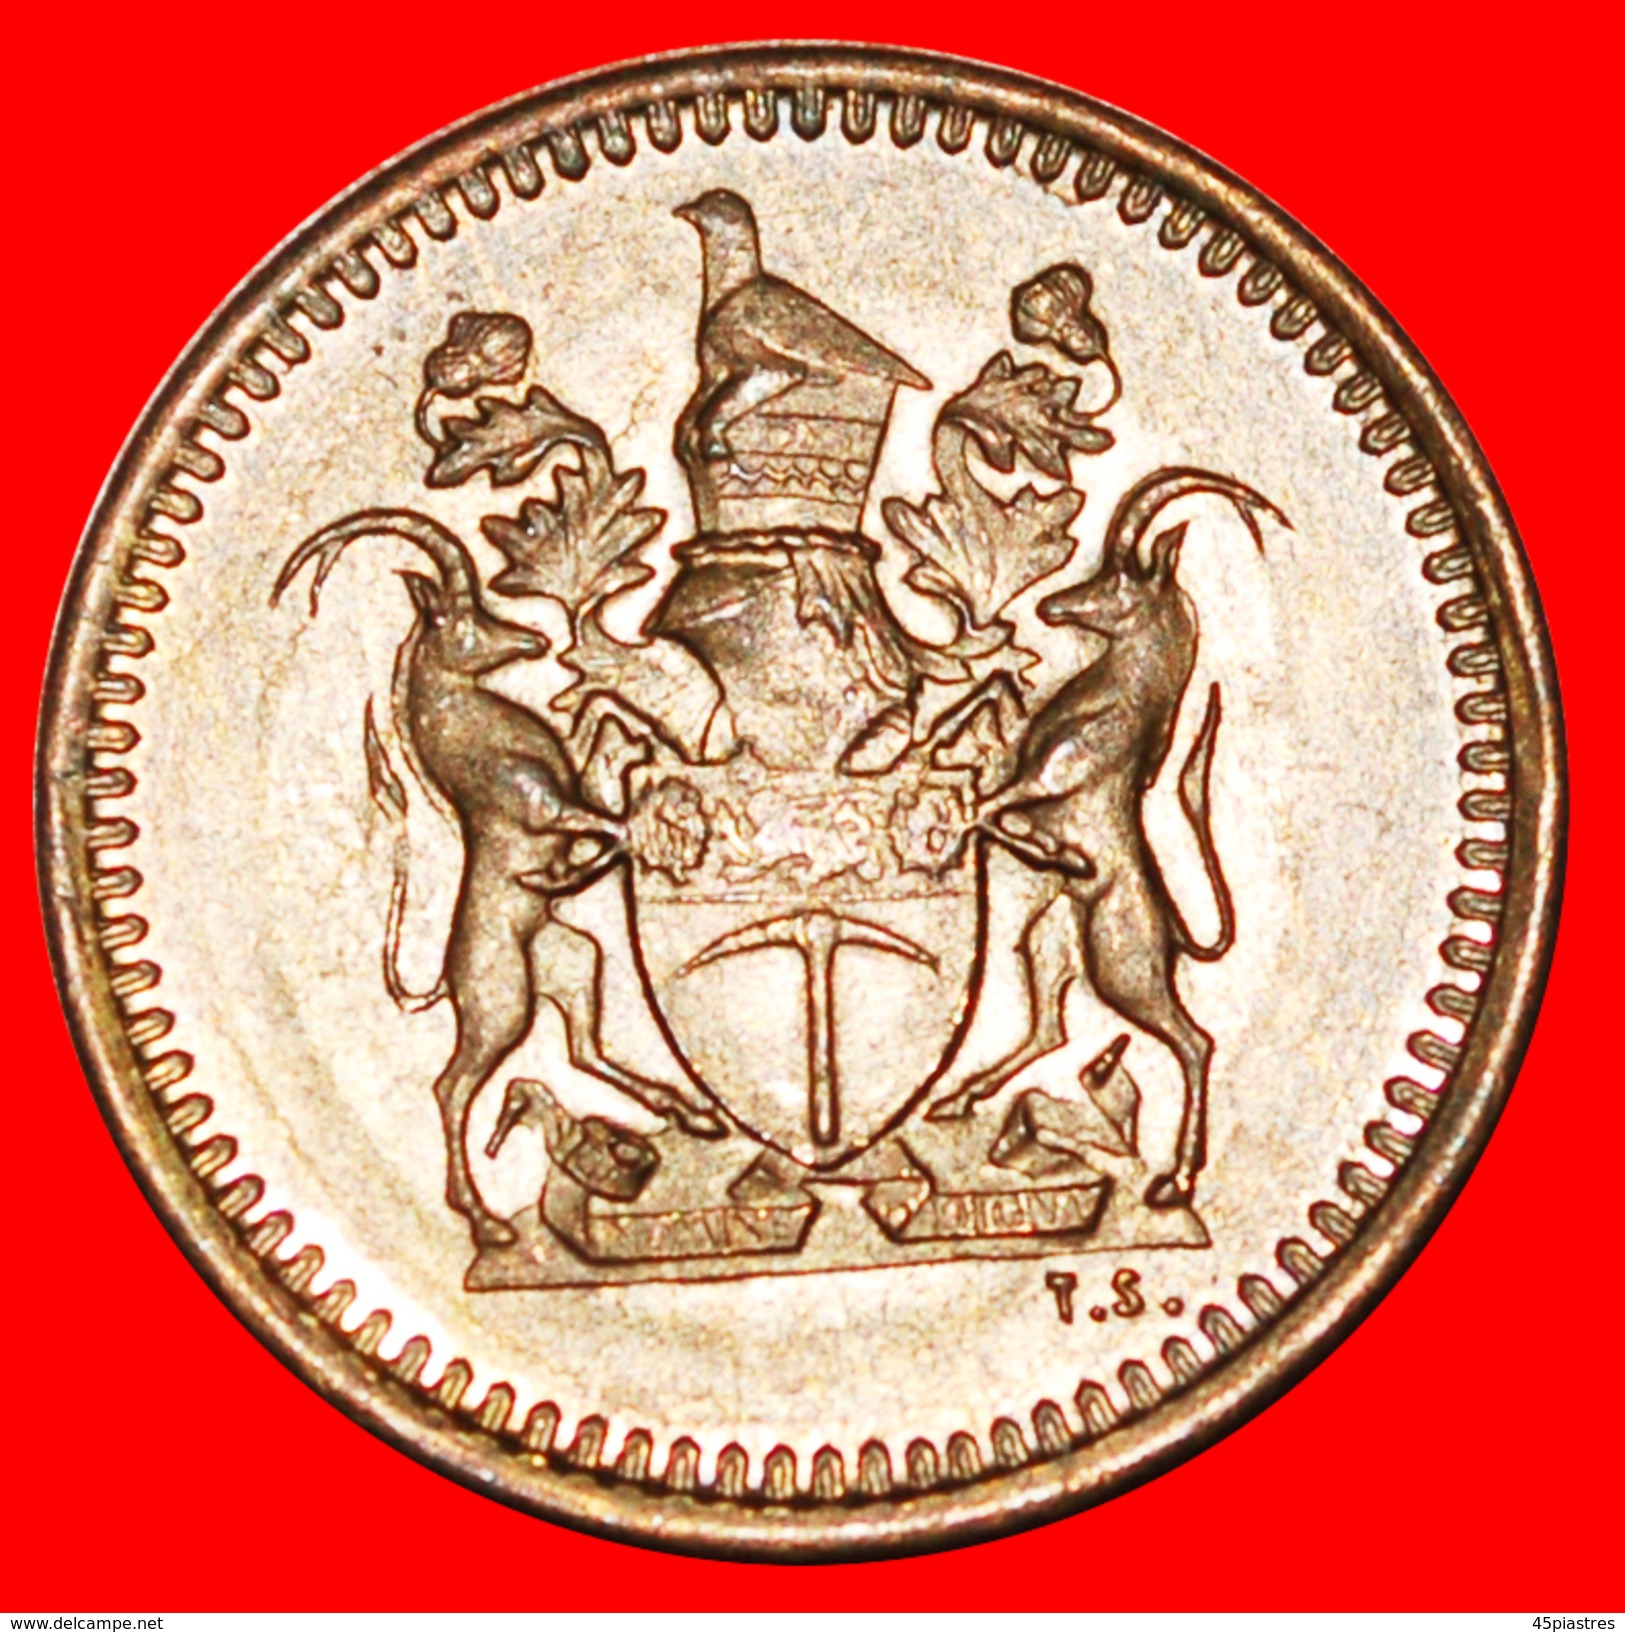 § COAT OF ARMS: RHODESIA &#x2605; 1/2 CENT 1975 UNC MINT LUSTER! LOW START&#x2605; NO RESERVE! - Rhodesia